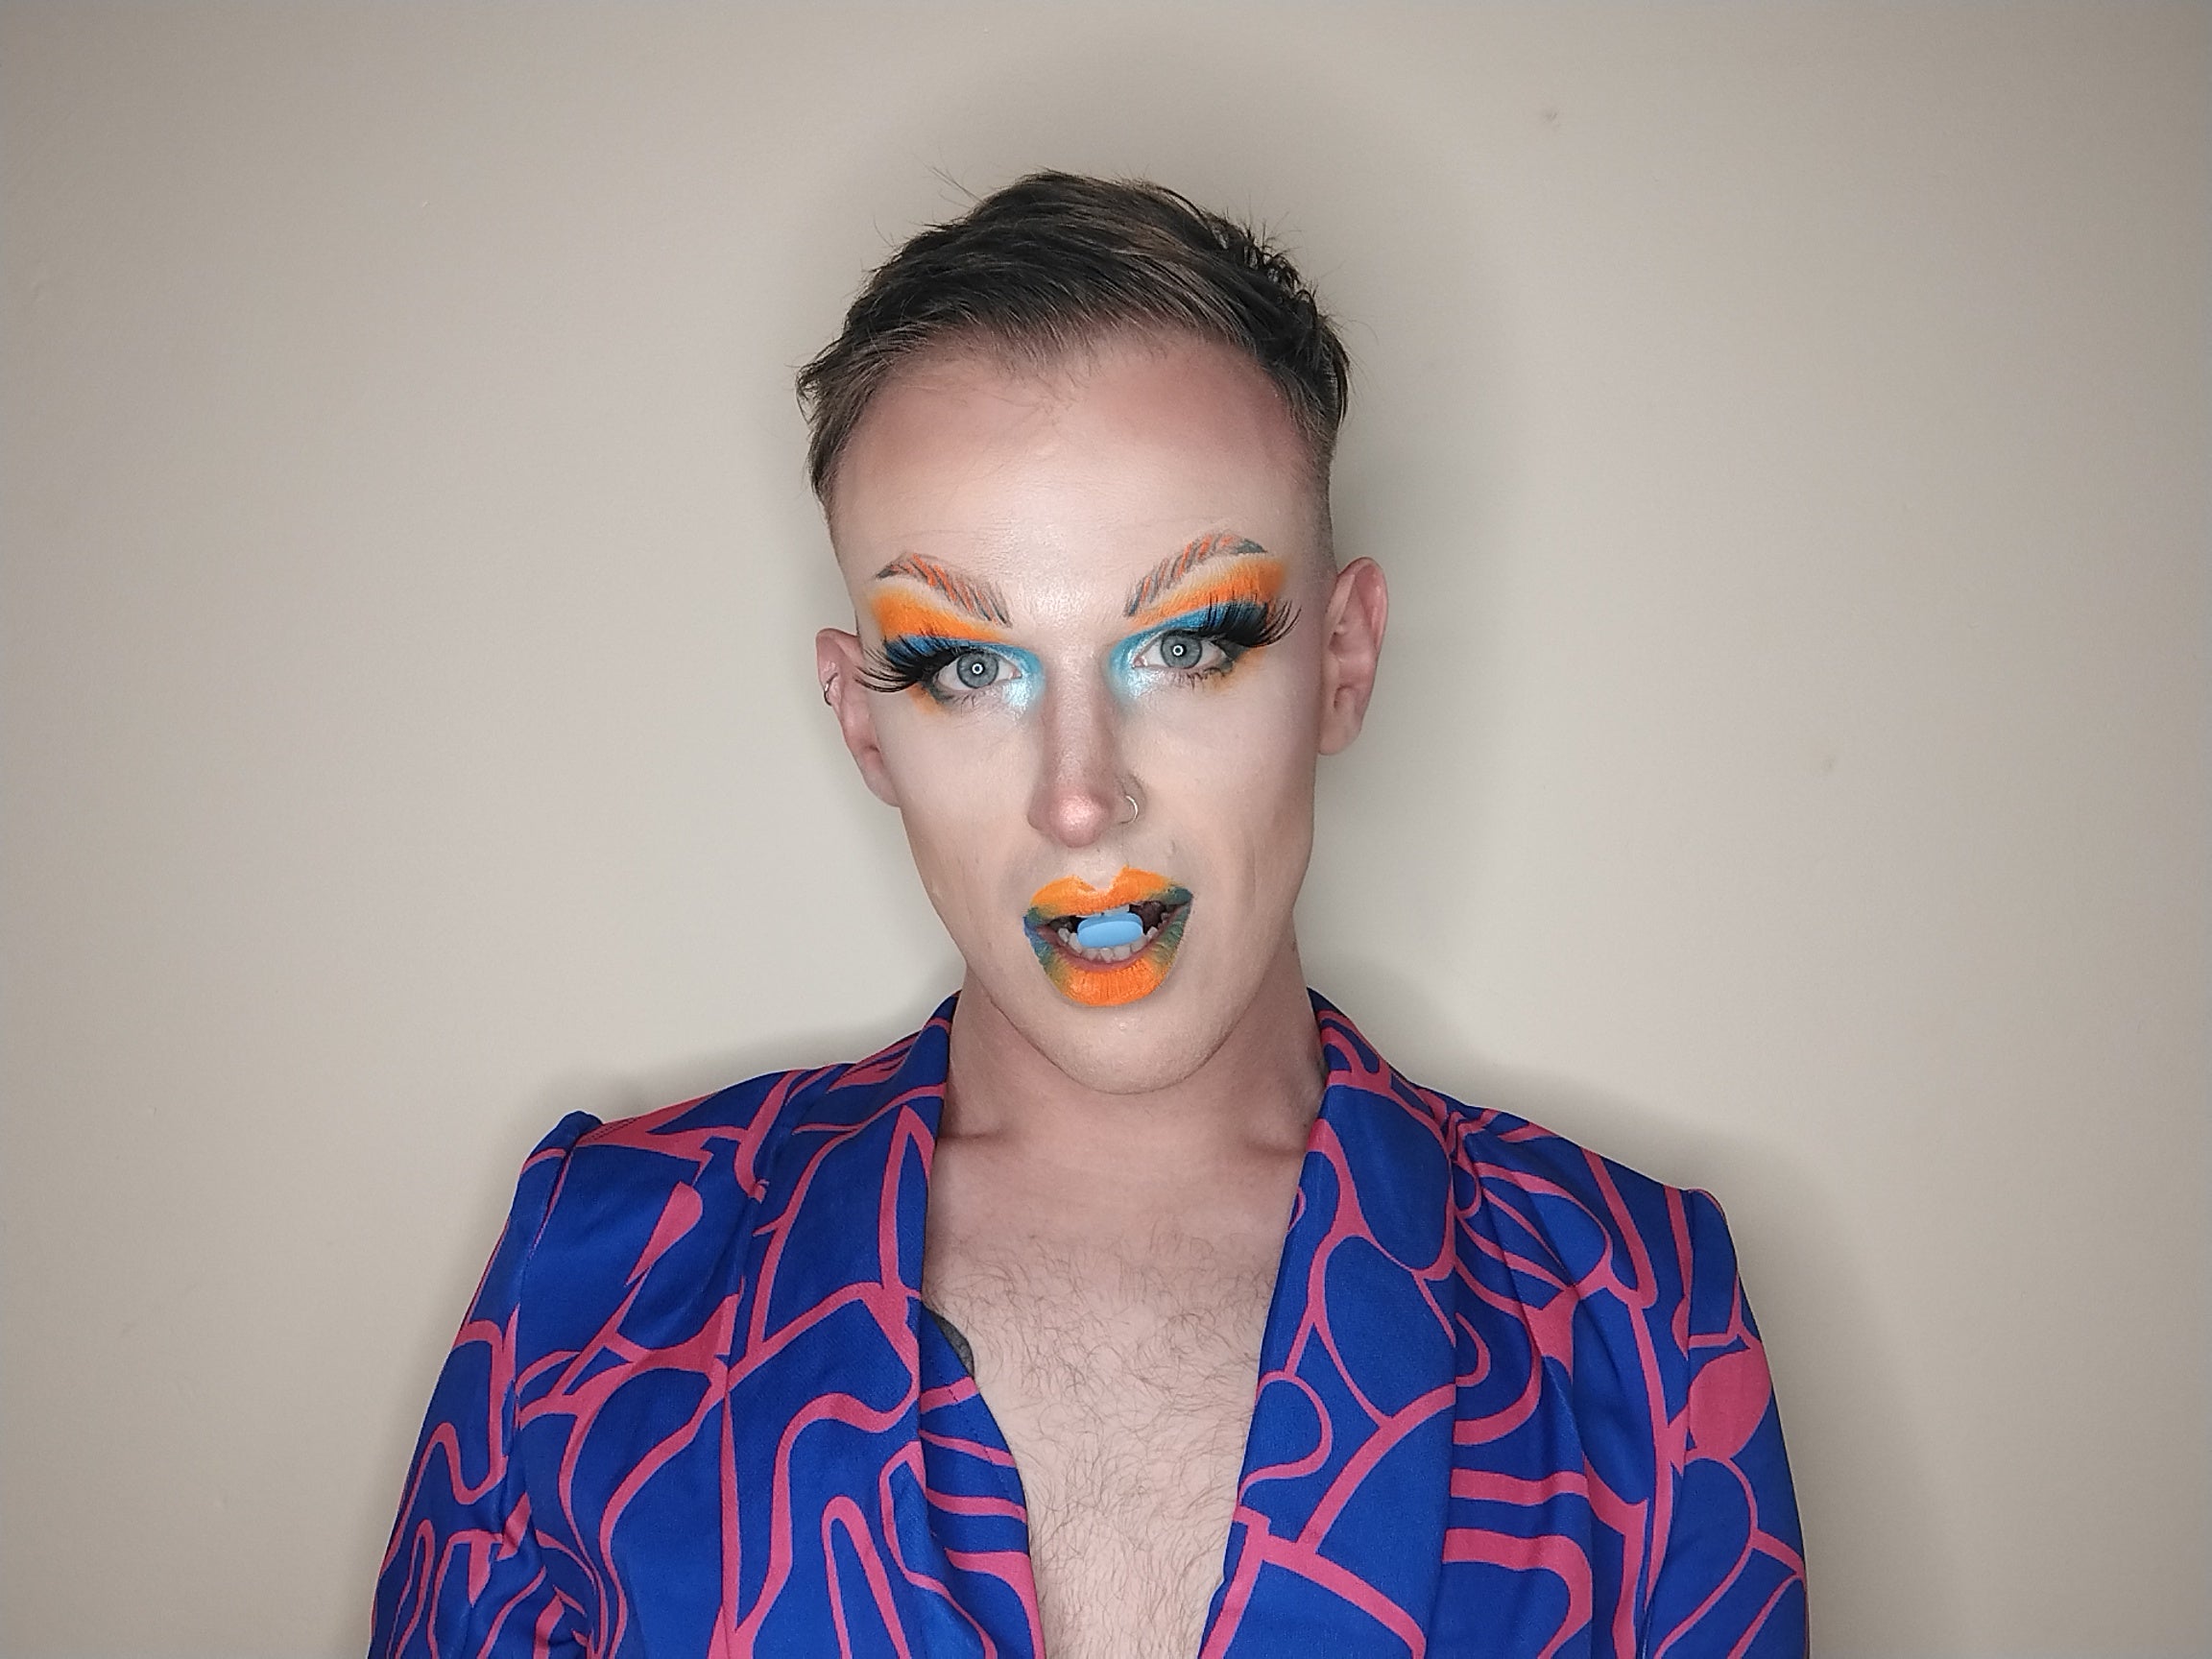 Nicky Cherryman, 32 - PhD student and drag performer also known as Ibi Profane